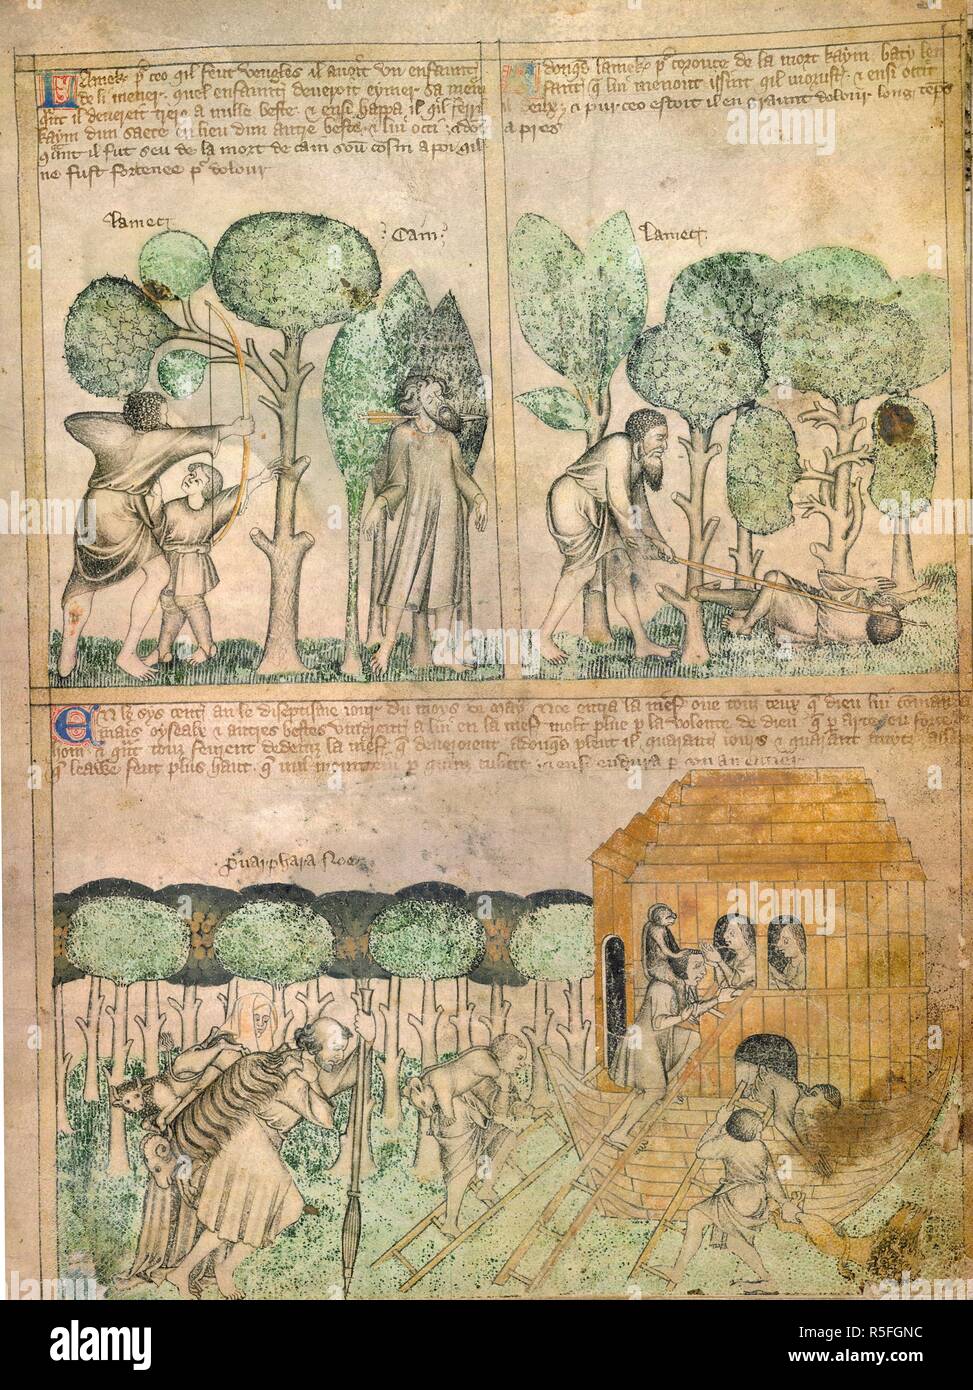 Death of Cain; entering the ark. Egerton Genesis Picture Book. England; circa 1360. [Whole folio] Three scenes. Lamech kills Cain with bow and arrow. Death of the boy Jabal. Below, Noah and family enter the ark. The wives of Noah's sons are in the ark; Shem, Ham, and Japhet, carring animals, are on ladders about to enter. Behind, Noah, carrying a ram and leaning on a staff, and Puarphara, his wife, with a small bull, approach the ark.  Image taken from Egerton Genesis Picture Book.  Originally published/produced in England; circa 1360. . Source: Egerton 1894, f.3. Language: French. Stock Photo